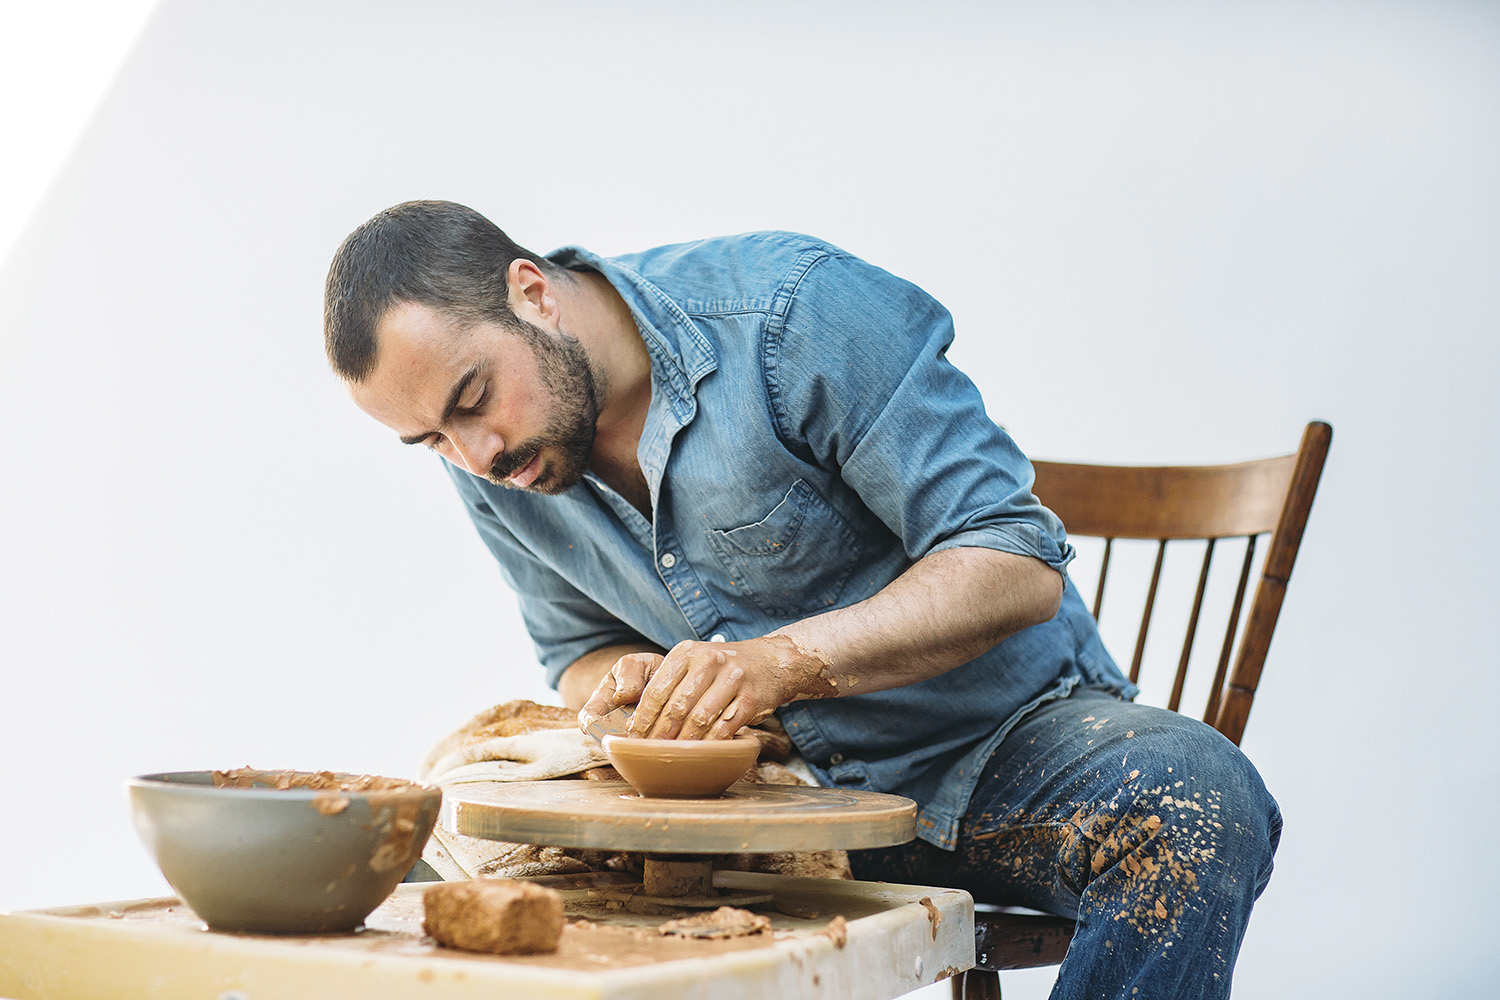 Alex Matisse and some of East Fork Pottery’s new line of dinnerware. Photo by Tim Robison